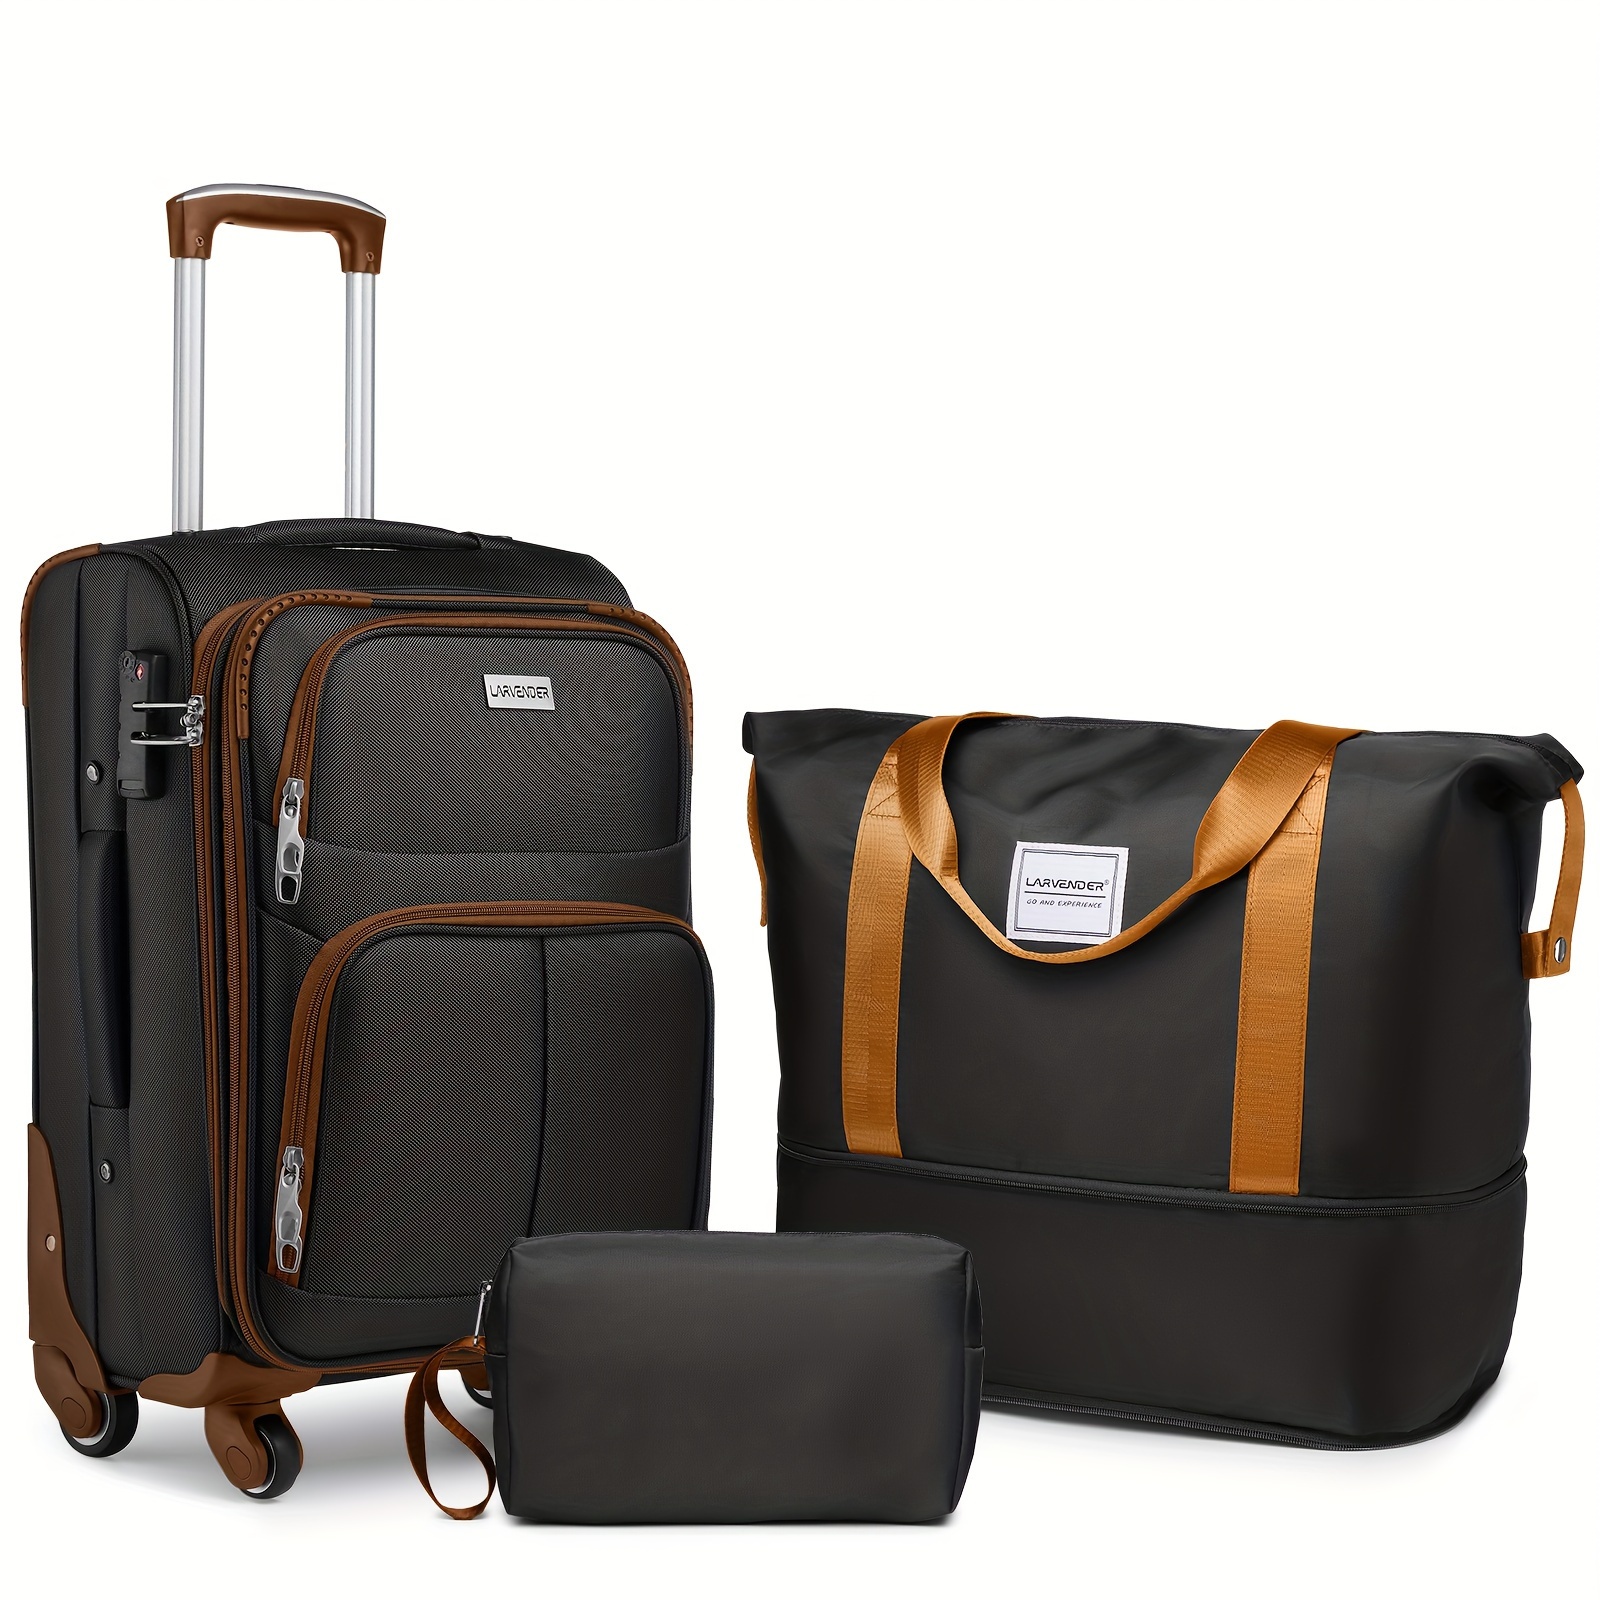 

Softside Luggage Sets 3 Piece, Carry On Luggage, Tsa Lock Spinner Wheels, Lightweight Rolling Suitcase For Men And Women